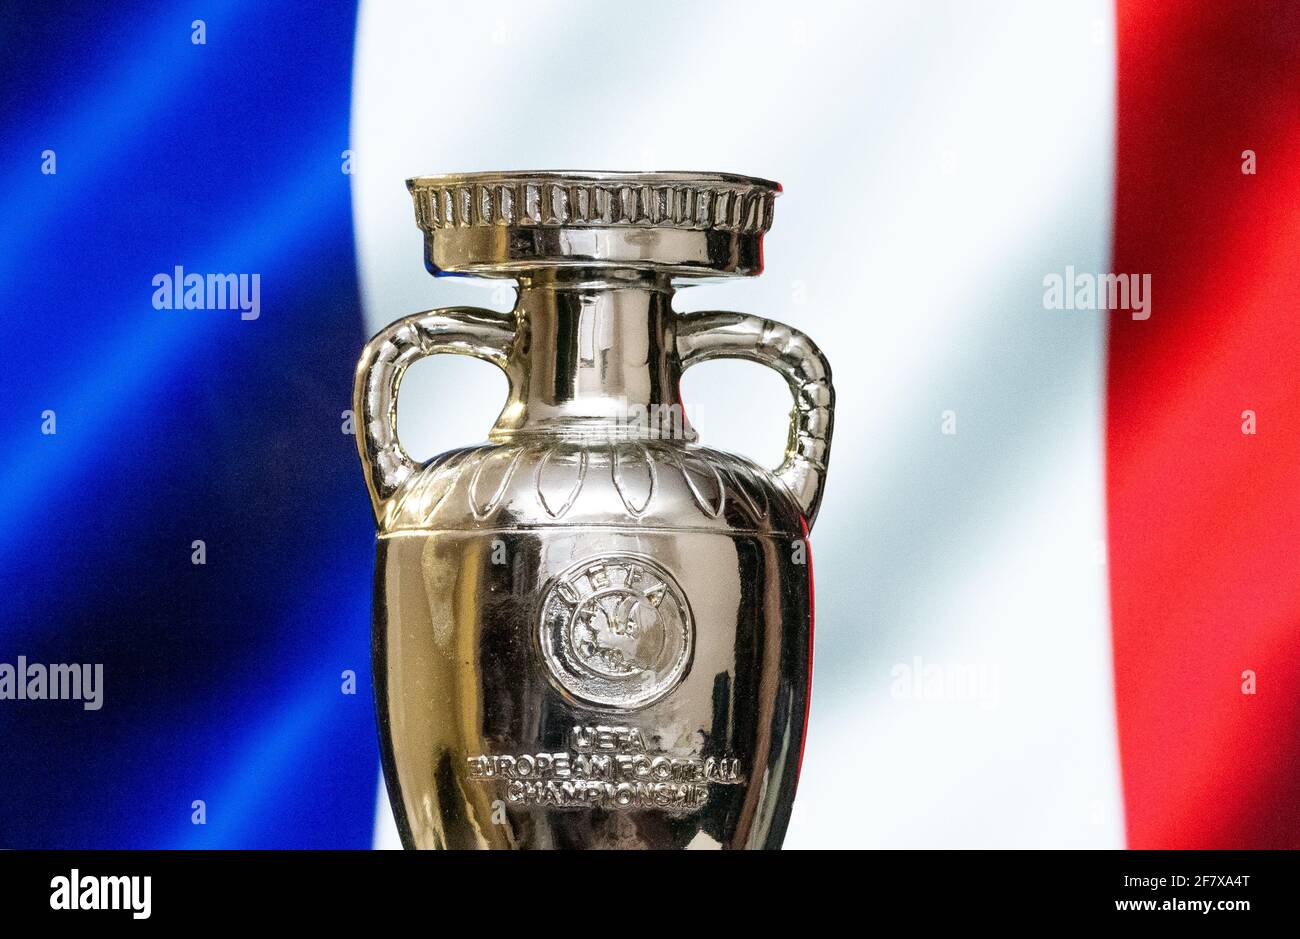 April 10, 2021. Paris, France. UEFA European Championship Cup with the  French flag in the background Stock Photo - Alamy